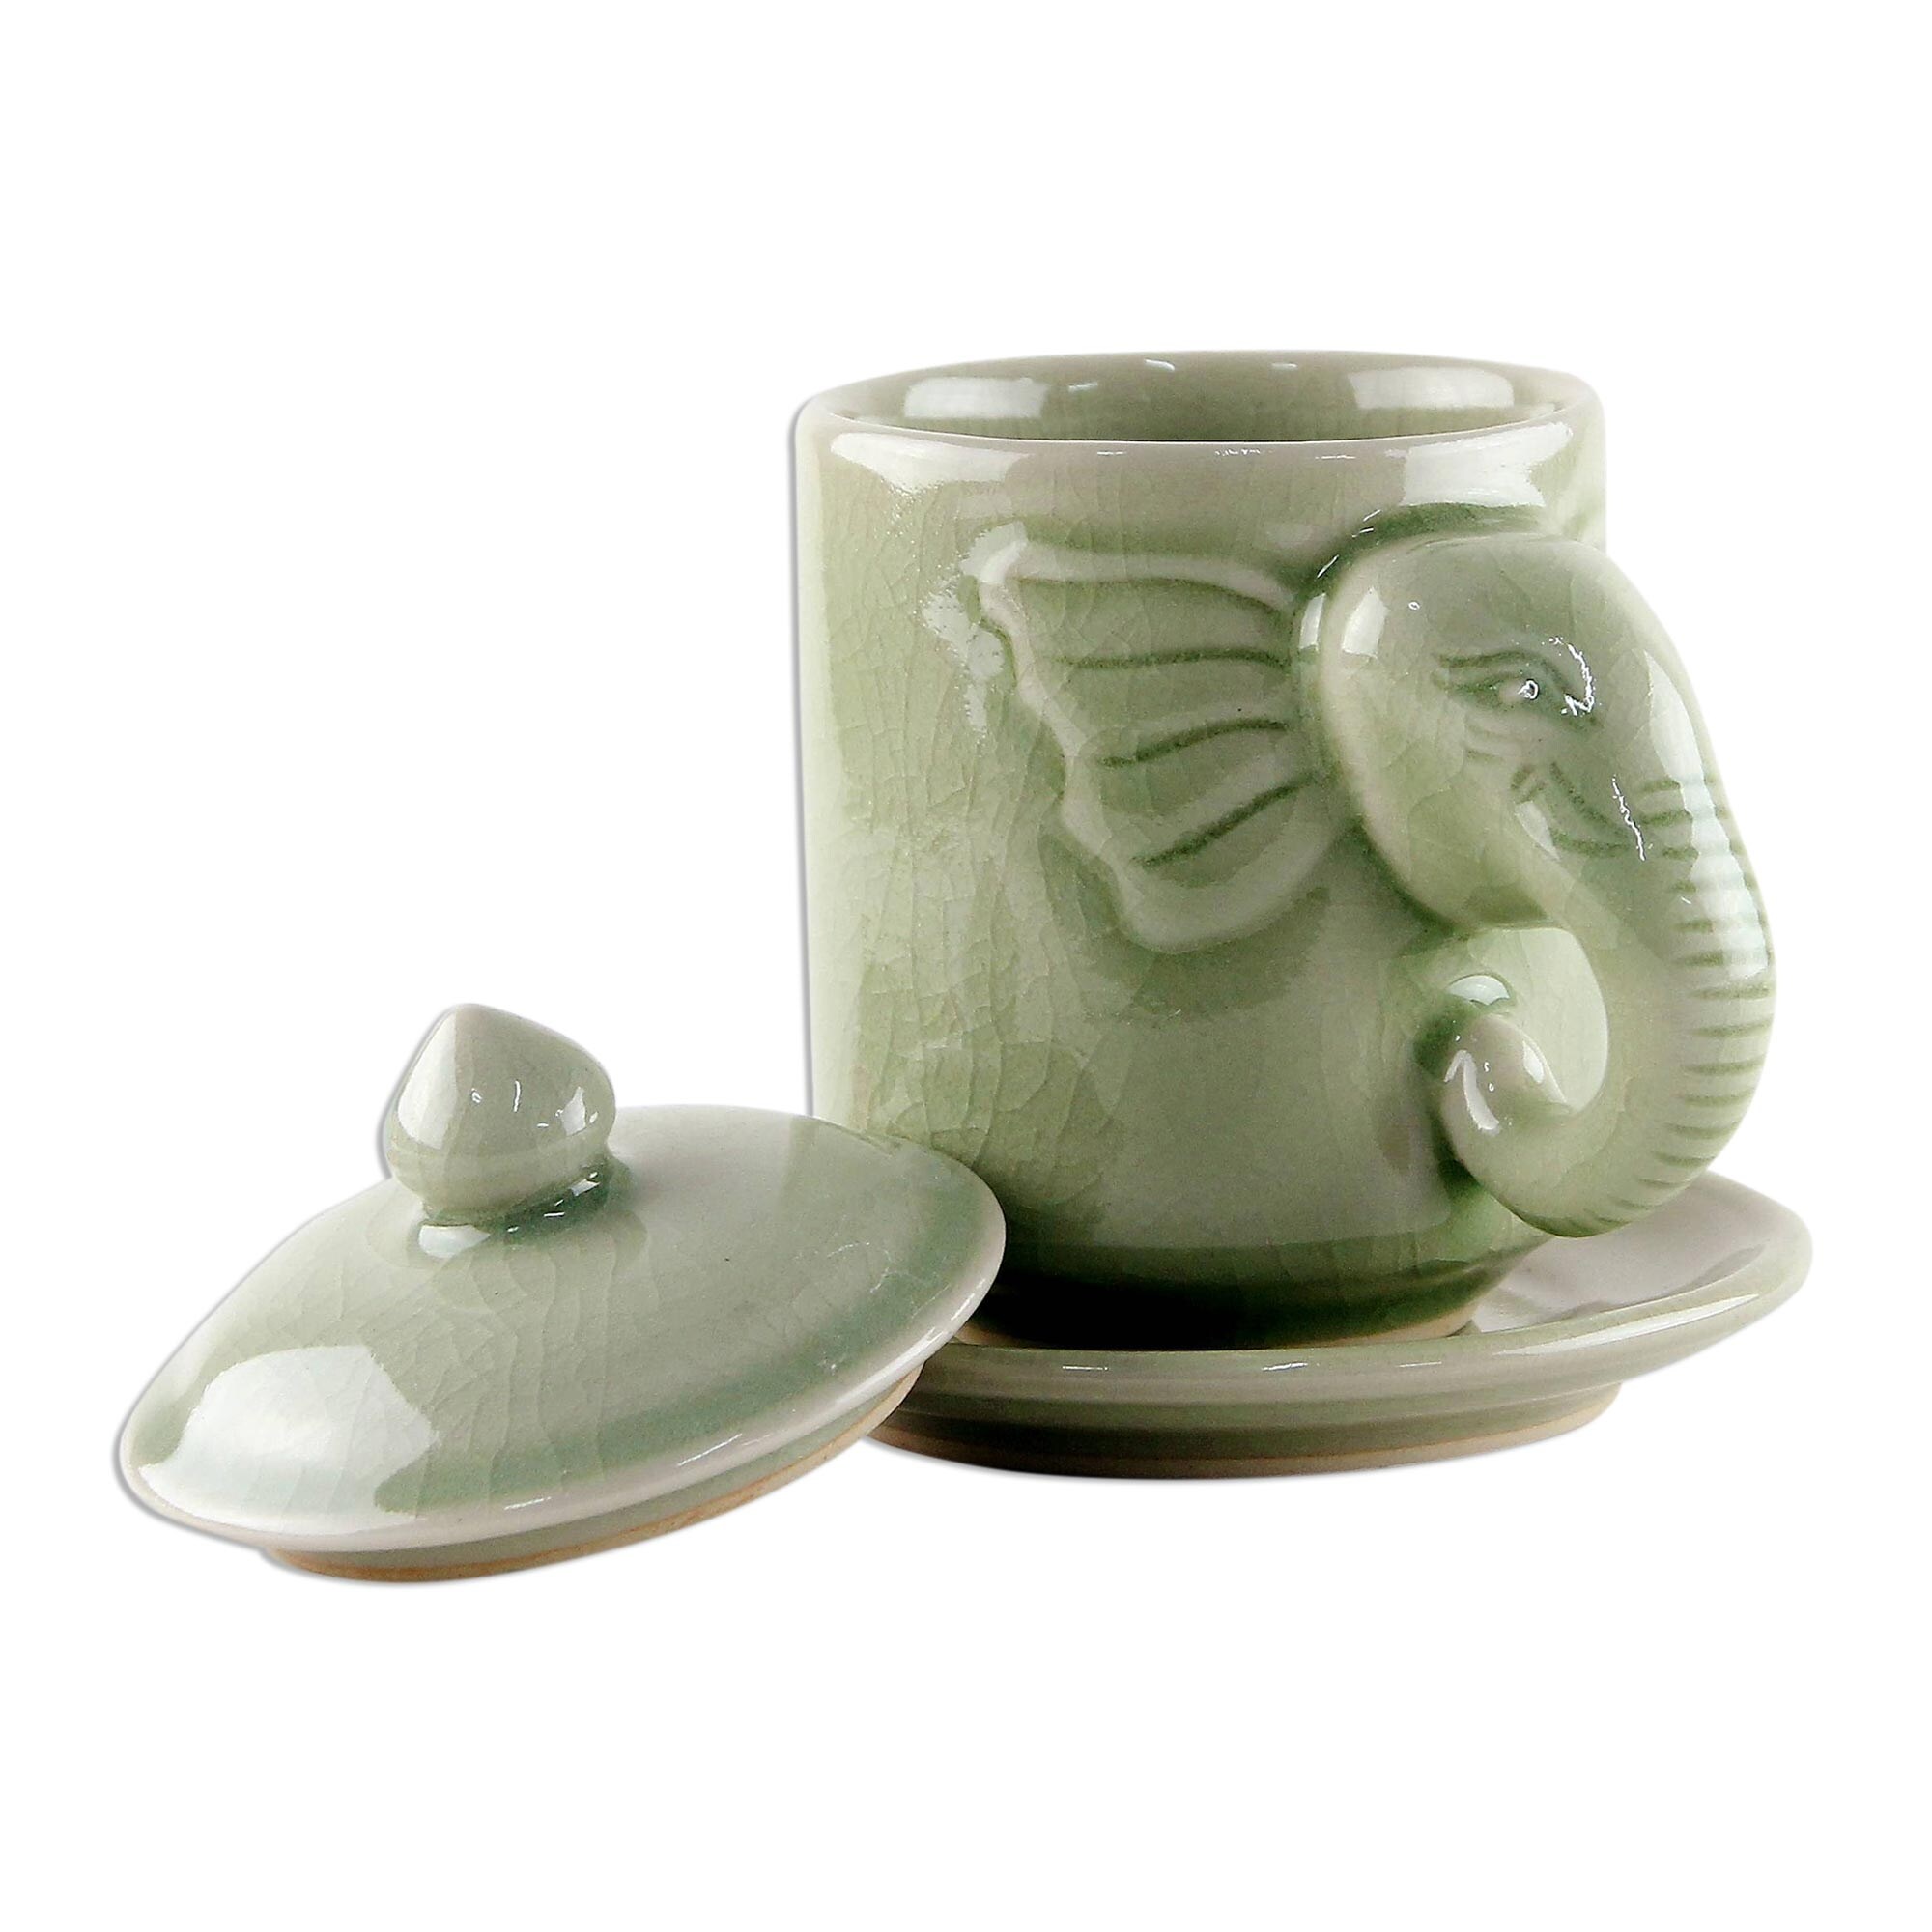 https://ak1.ostkcdn.com/images/products/is/images/direct/ba4fc0c0b16cfd052b76f47f094783cd13de5216/Handmade-Chiang-Mai-Elephant-cup-and-saucer-%28Thailand%29.jpg